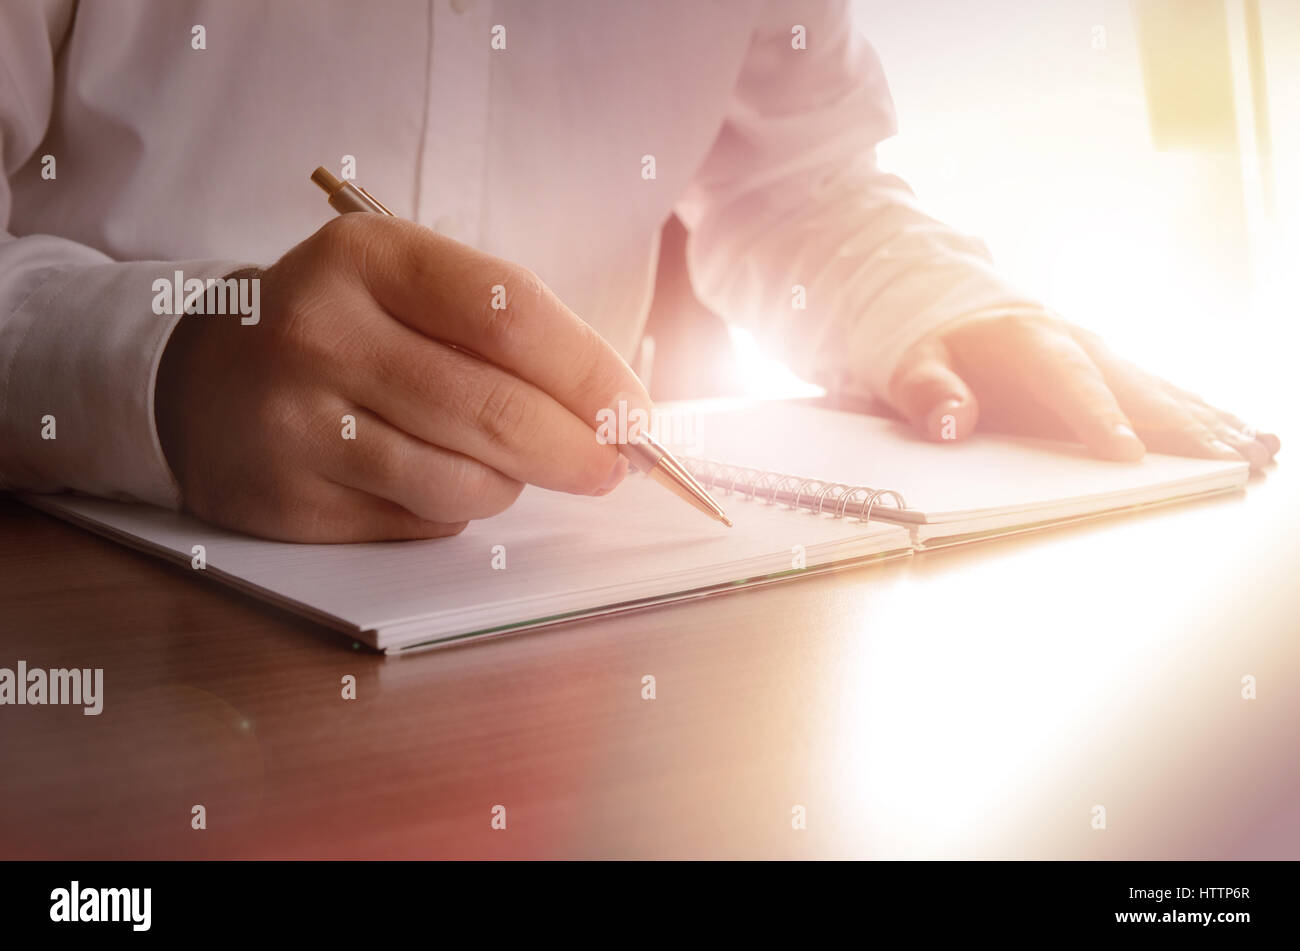 Concept of a businessman writing on a notebook. Image can be used for several purposes like: background, website banner, promotional materials, poster Stock Photo